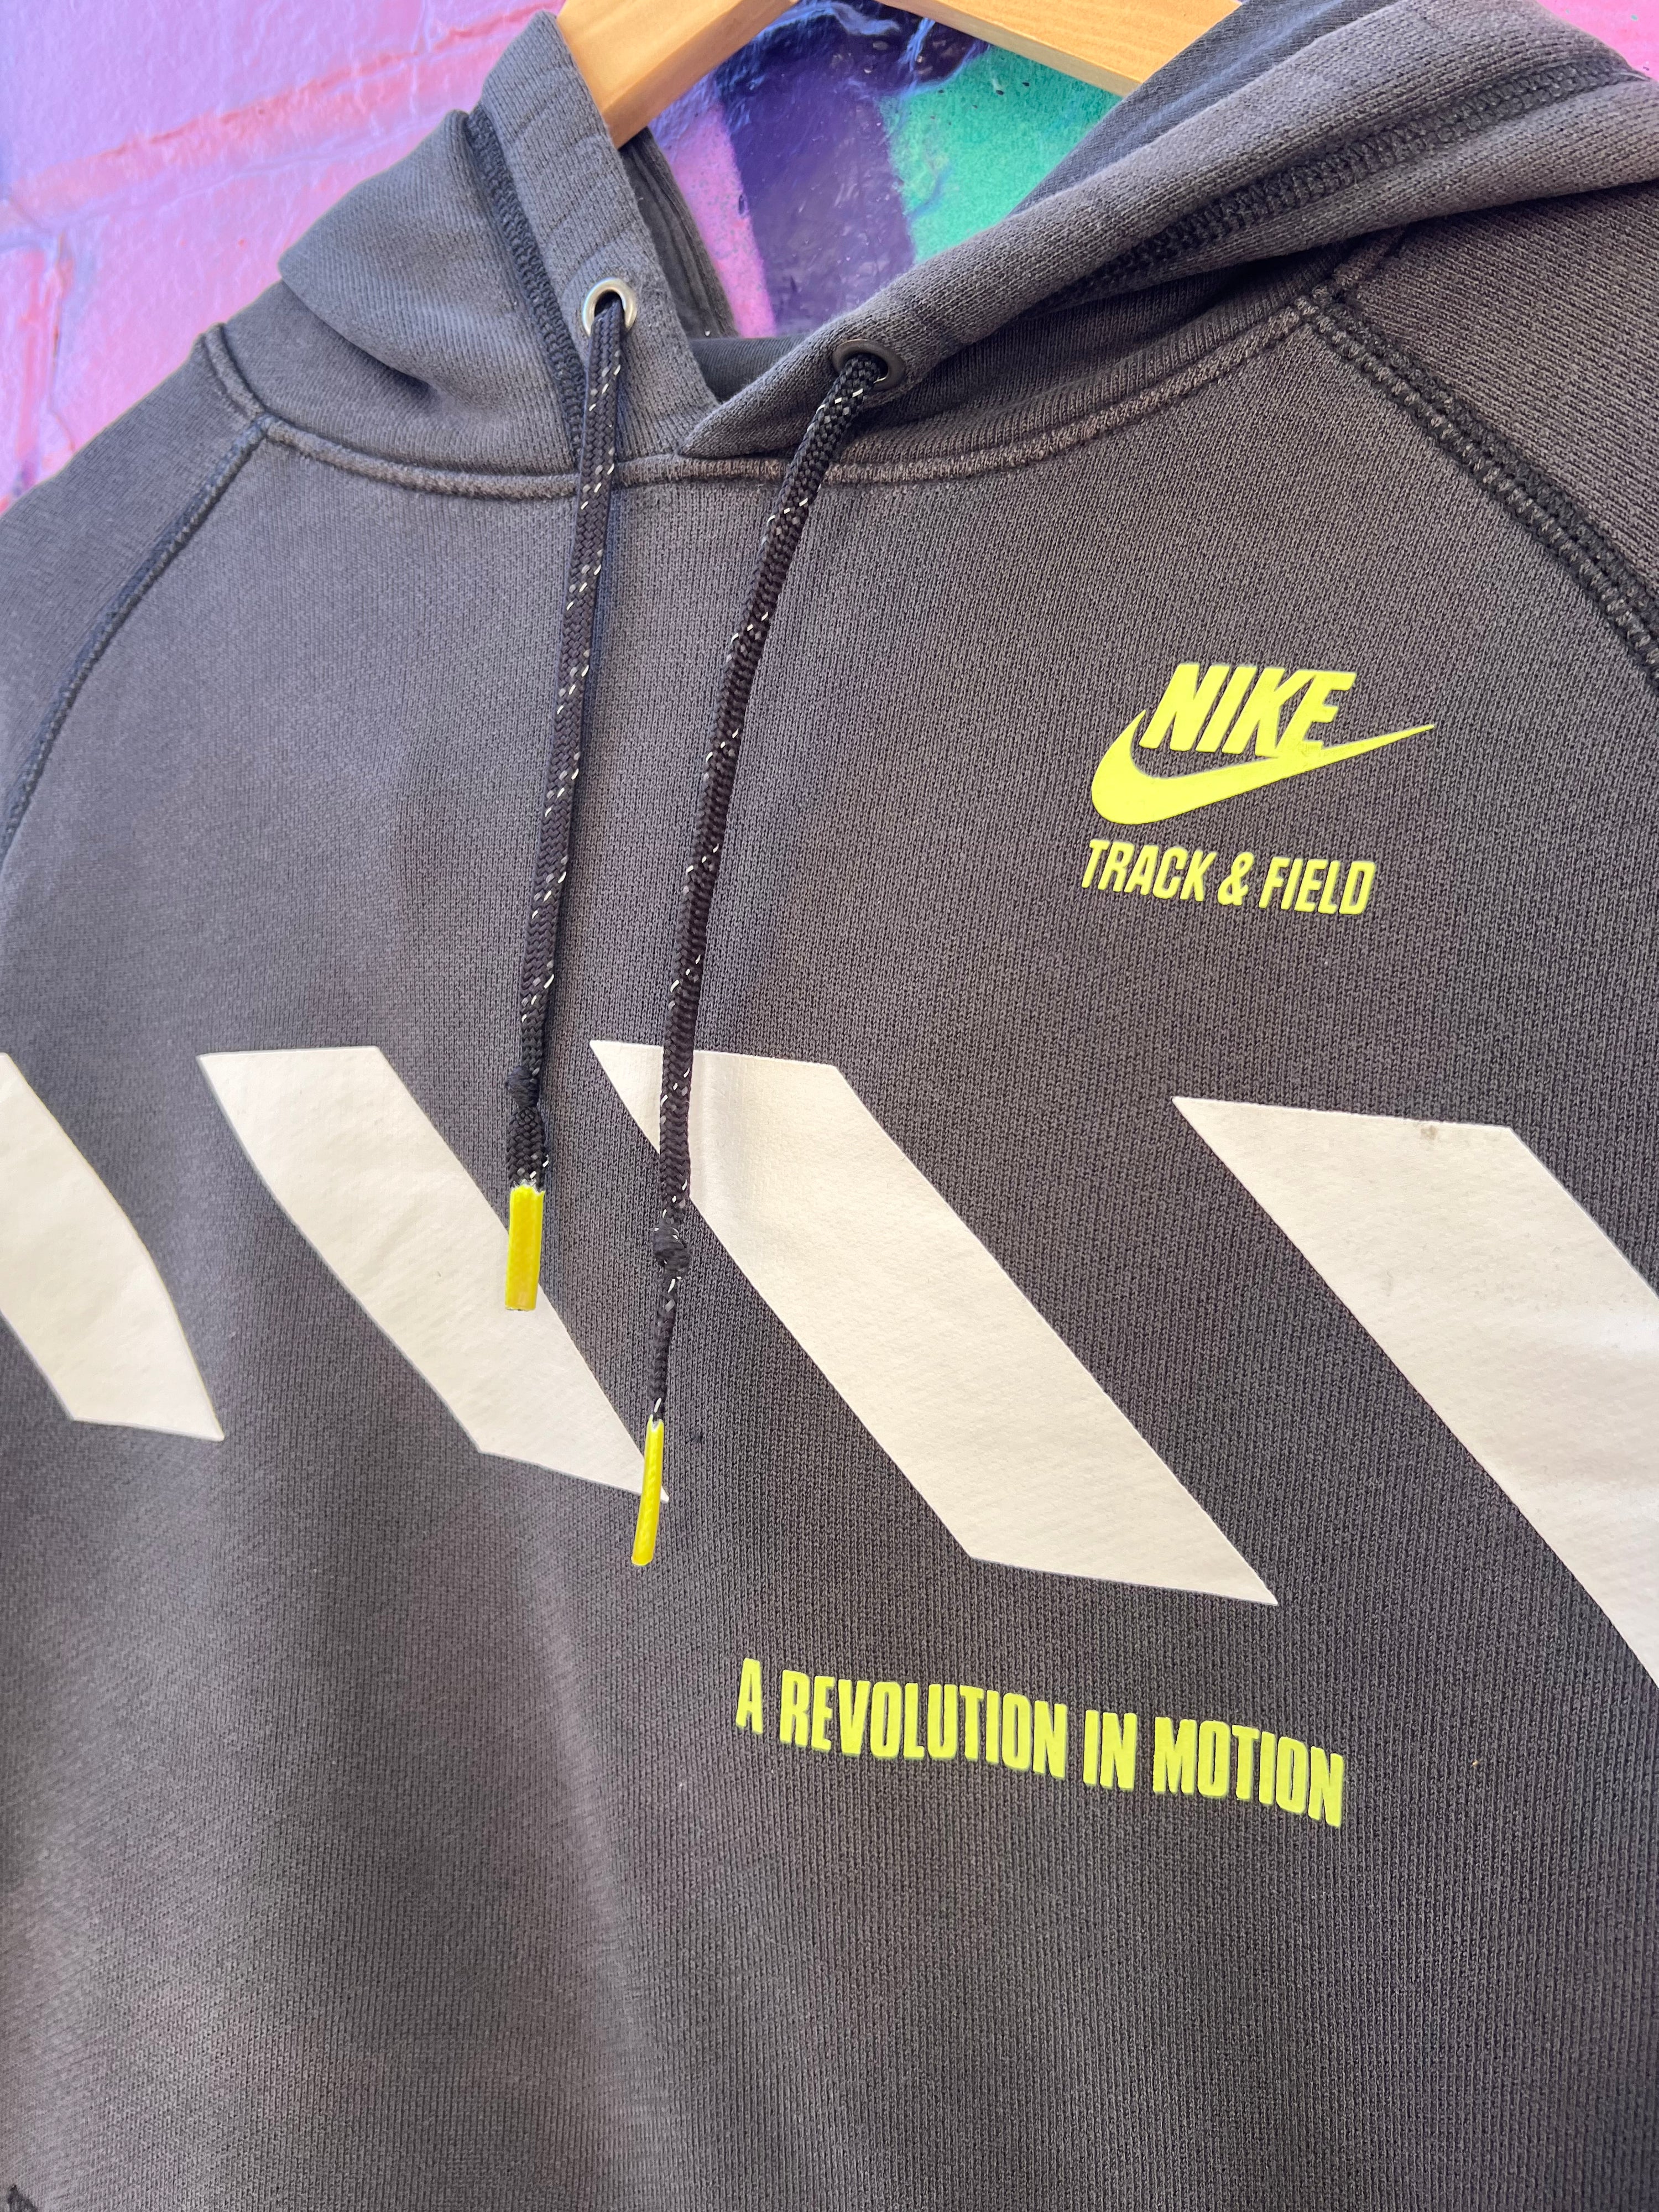 L - Nike A Revolution In Motion Hoodie